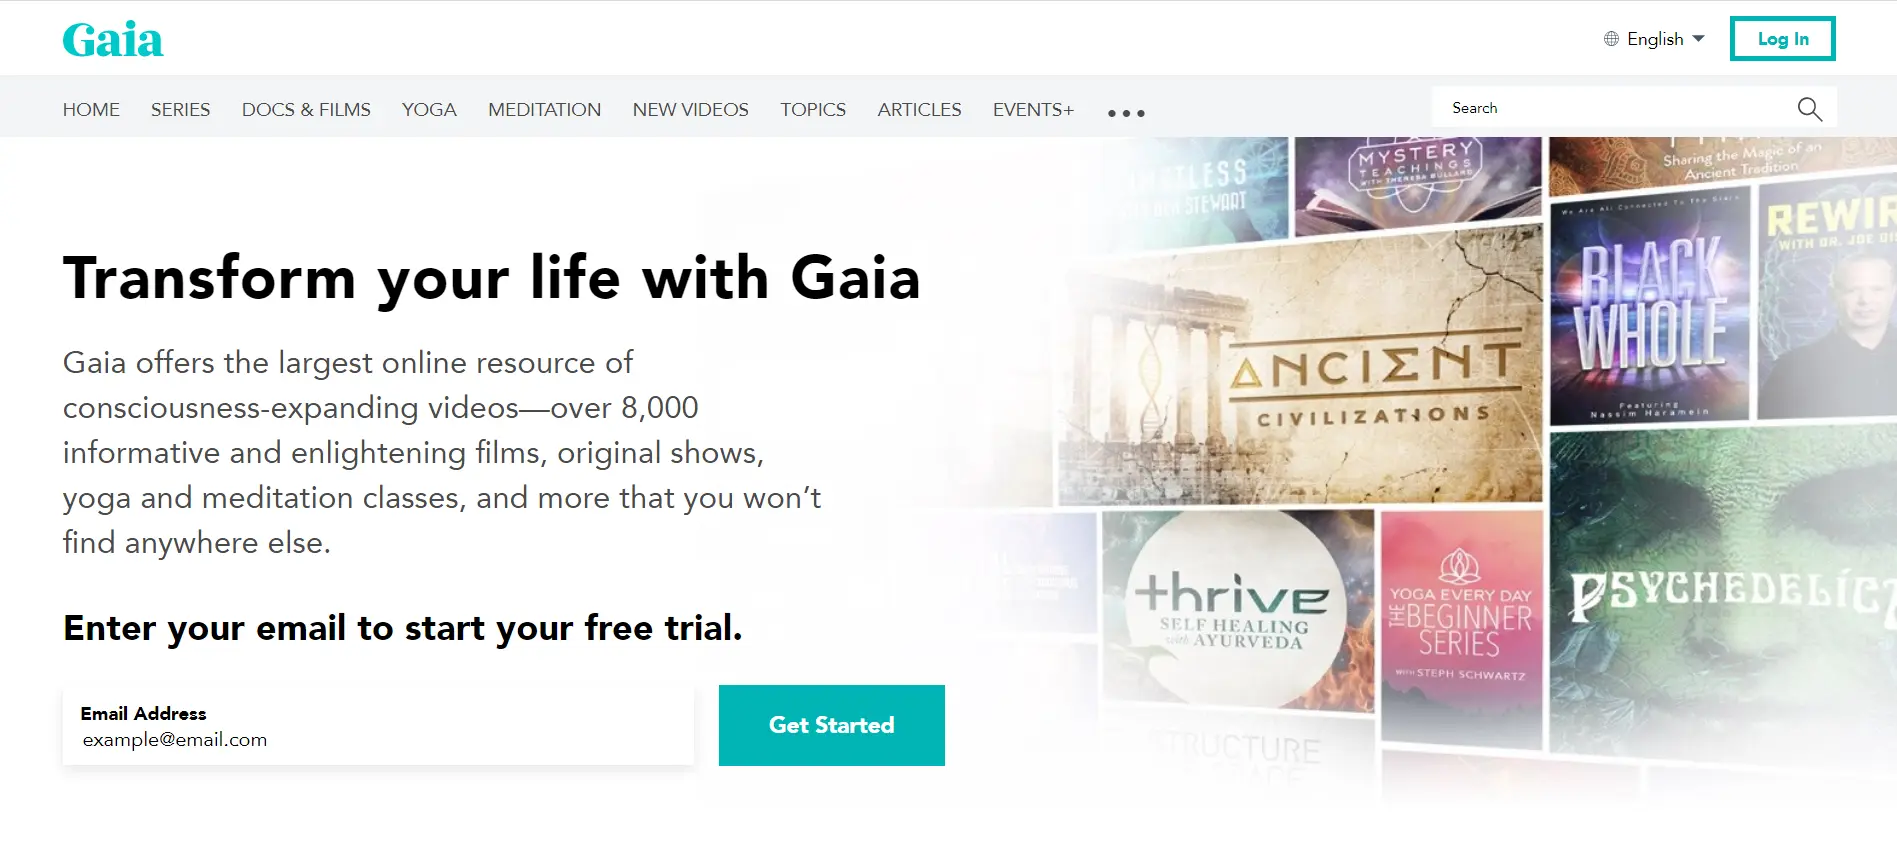 How To Cancel Gaia Free Trial